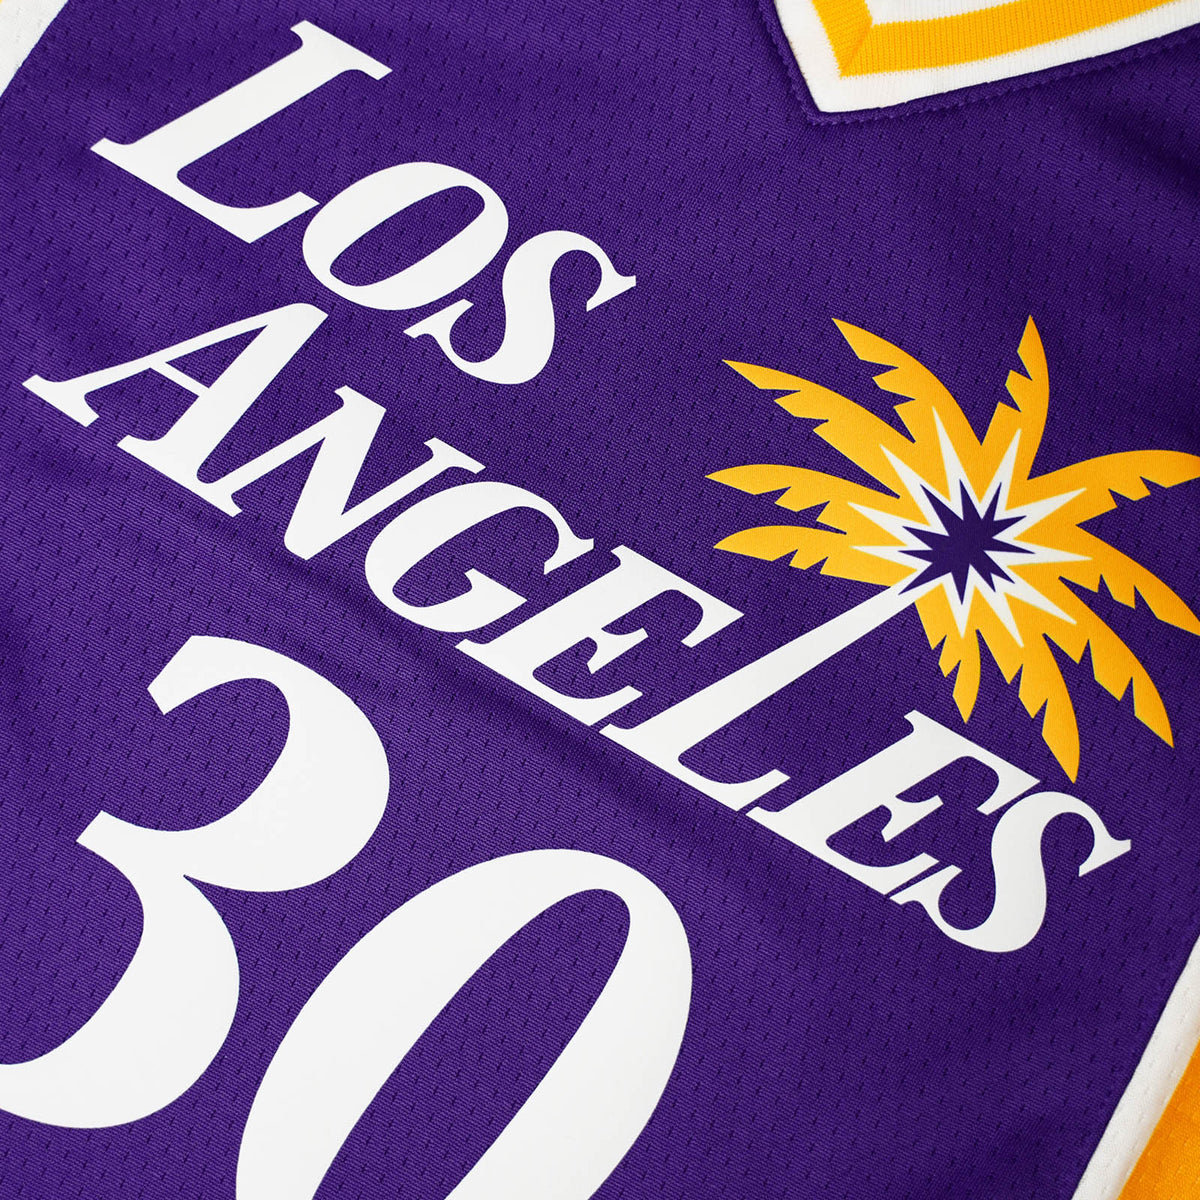 Los Angeles Sparks Gifts & Merchandise for Sale